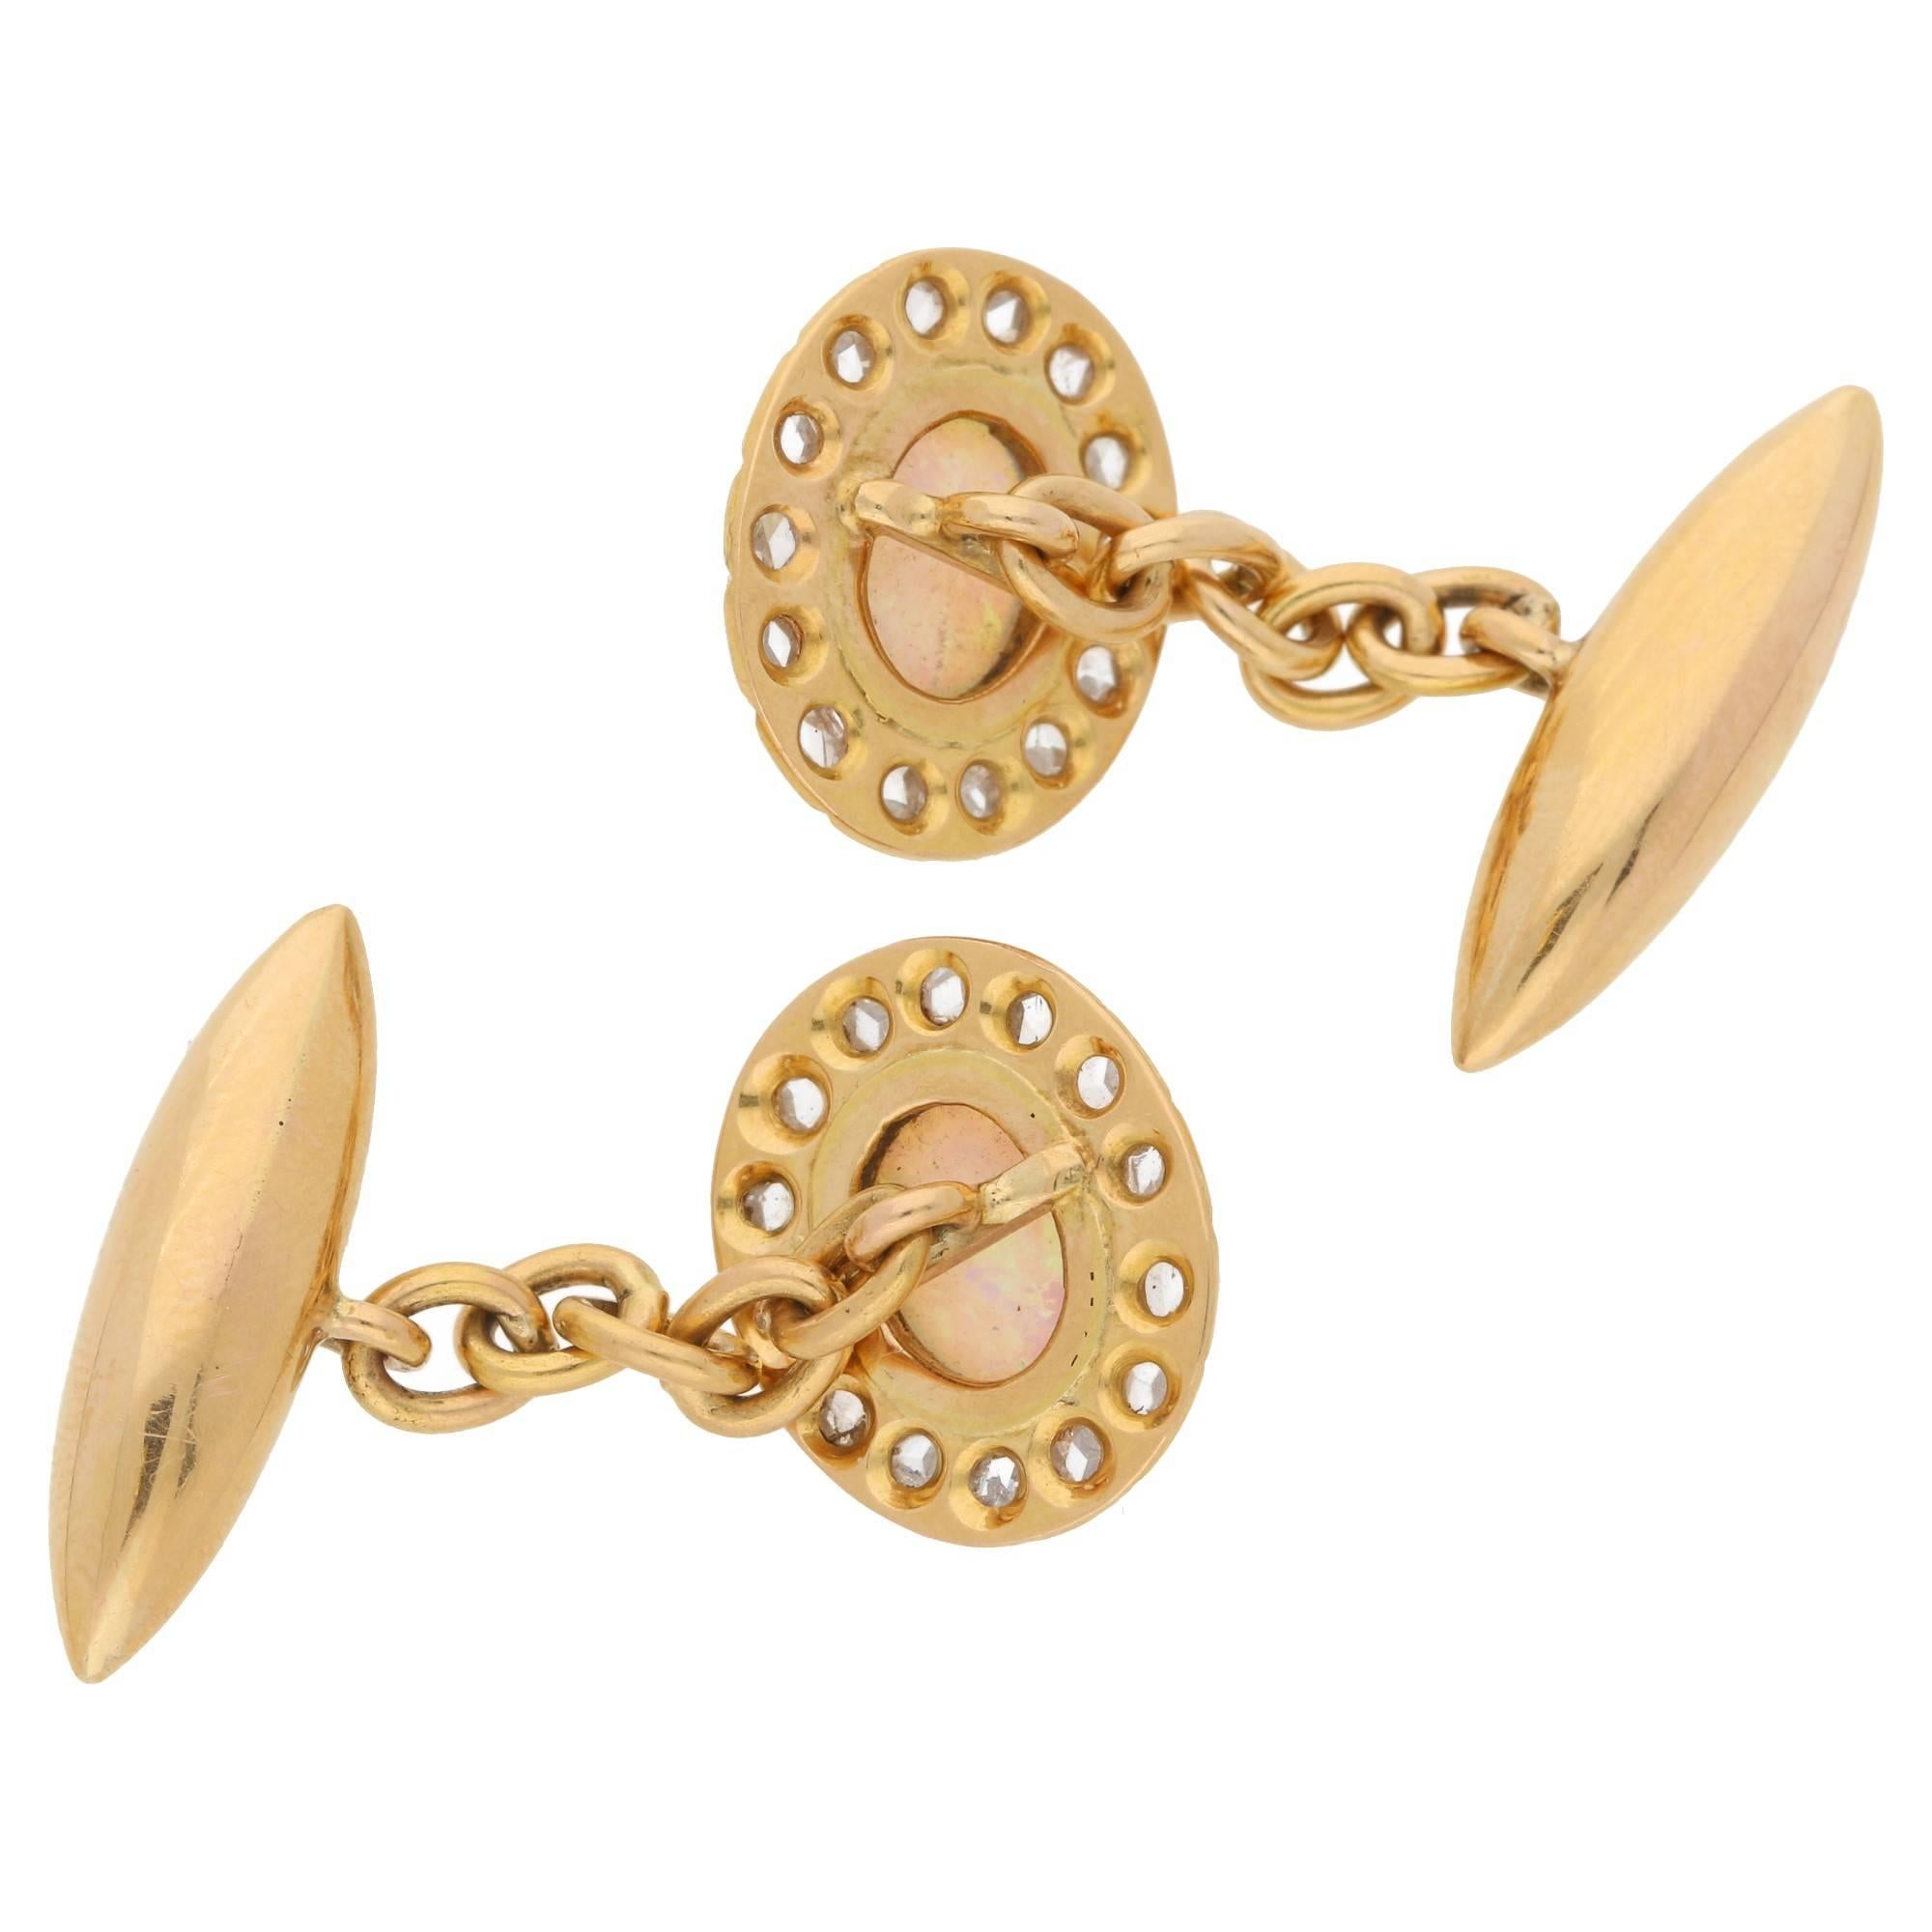 A pair of Victorian opal and diamond 18ct yellow gold cufflinks. With a centrally set oval cabochon opal mille grain set in 18ct yellow gold surrounded by a border of fourteen pinch set rose cut diamonds. On a classic five link chain and torpedo